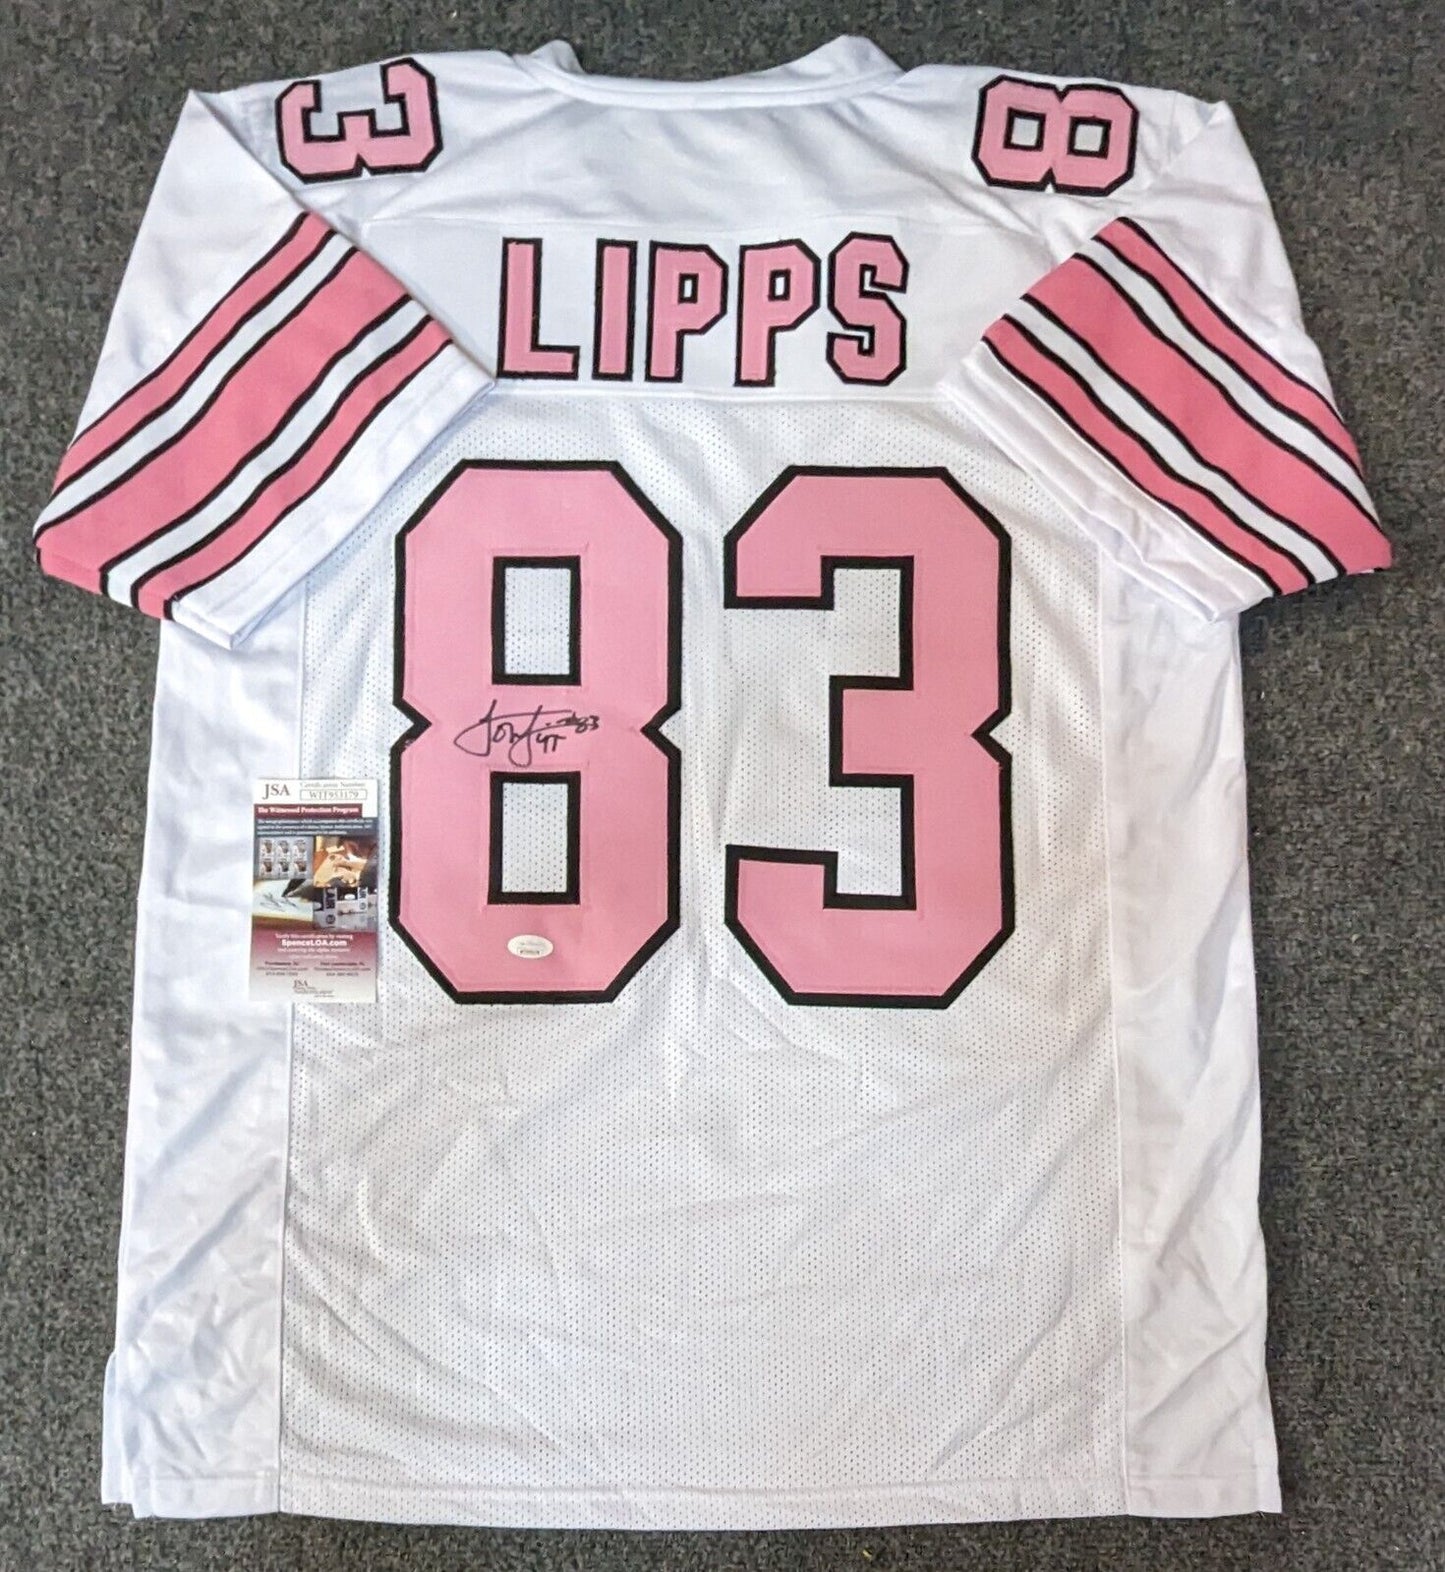 MVP Authentics Pittsburgh Steelers Louis Lipps Autographed Signed Jersey Jsa Coa 90 sports jersey framing , jersey framing